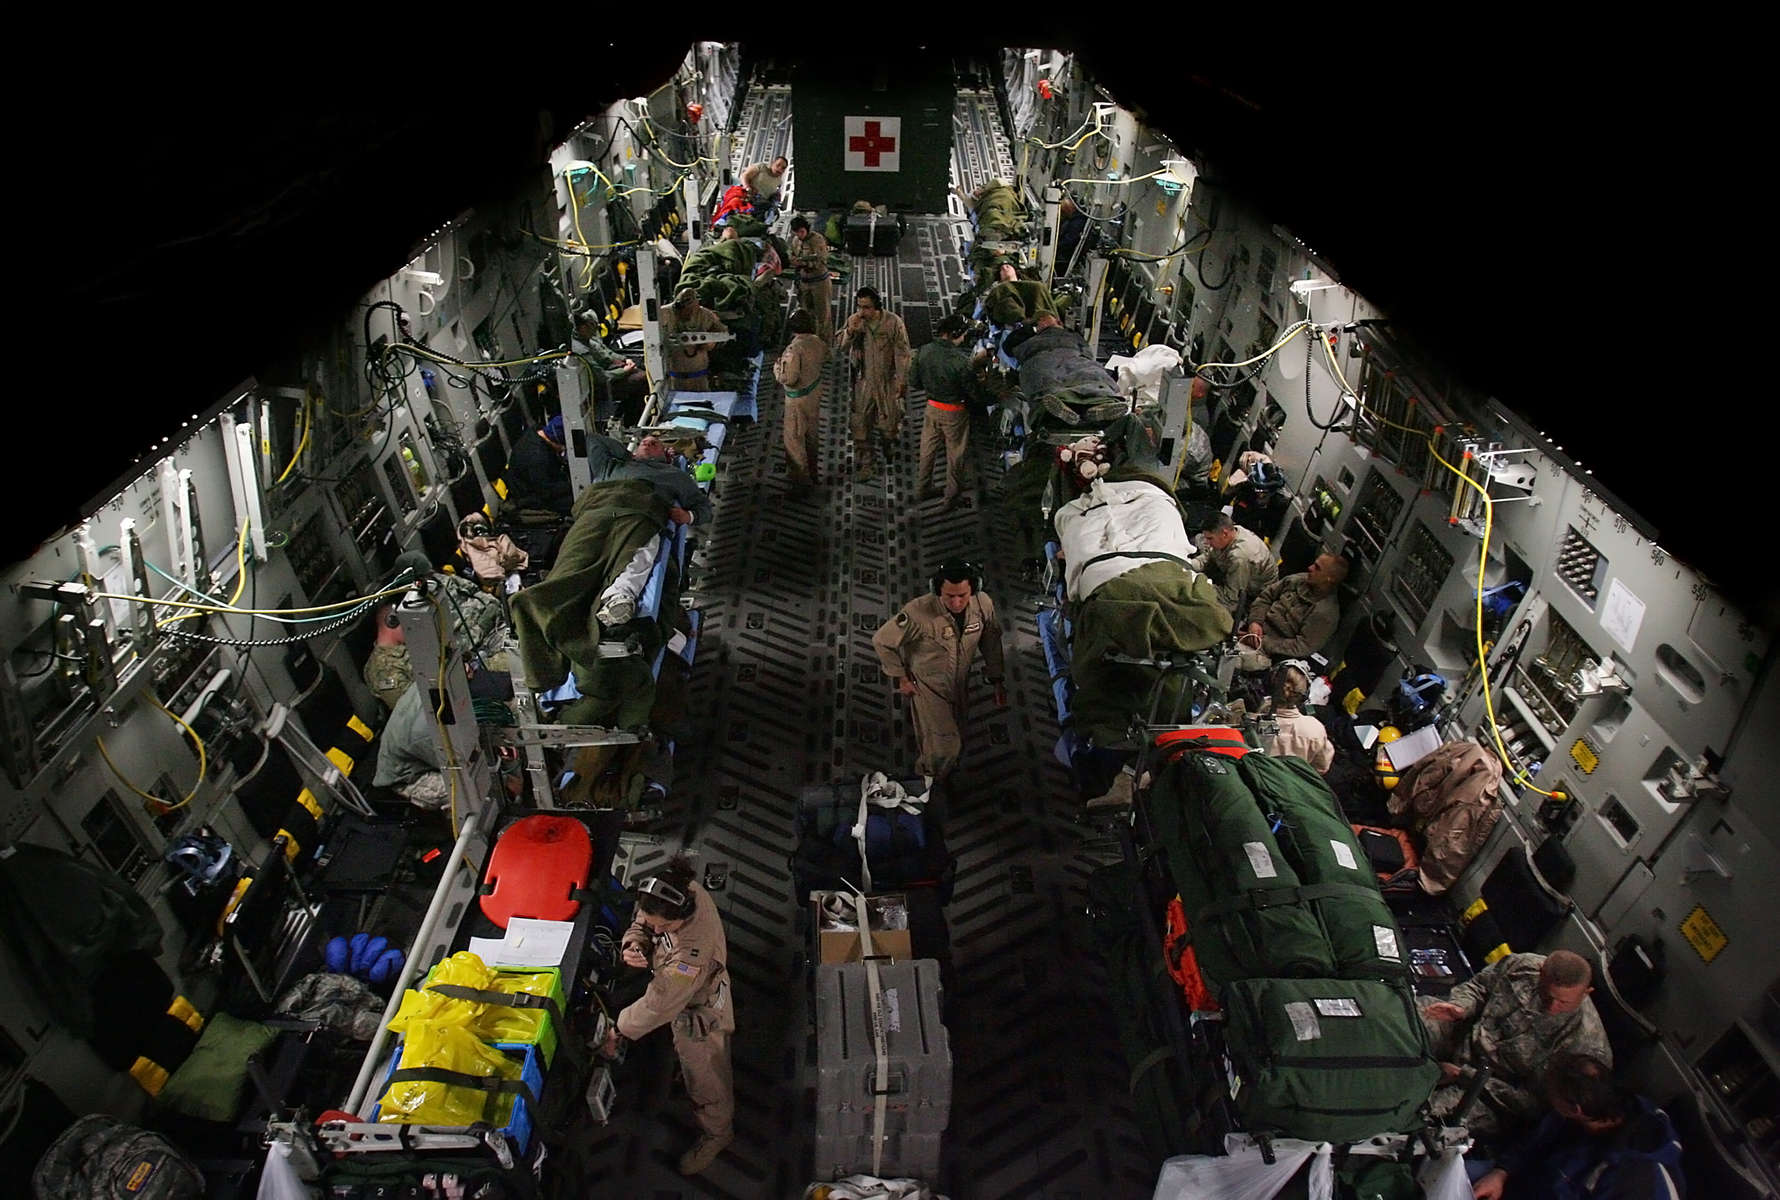 Medical technicians and flight nurses tend to the wounded warriors inside a March Air Reserve Base Globemaster C-17 aircraft after leaving Bagram Air Force Base in Afghanistan. The 30 wounded warriors will be flown to Ramstein Air Force Base in Germany for more medical care.(The Press-Enterprise/ Mark Zaleski)